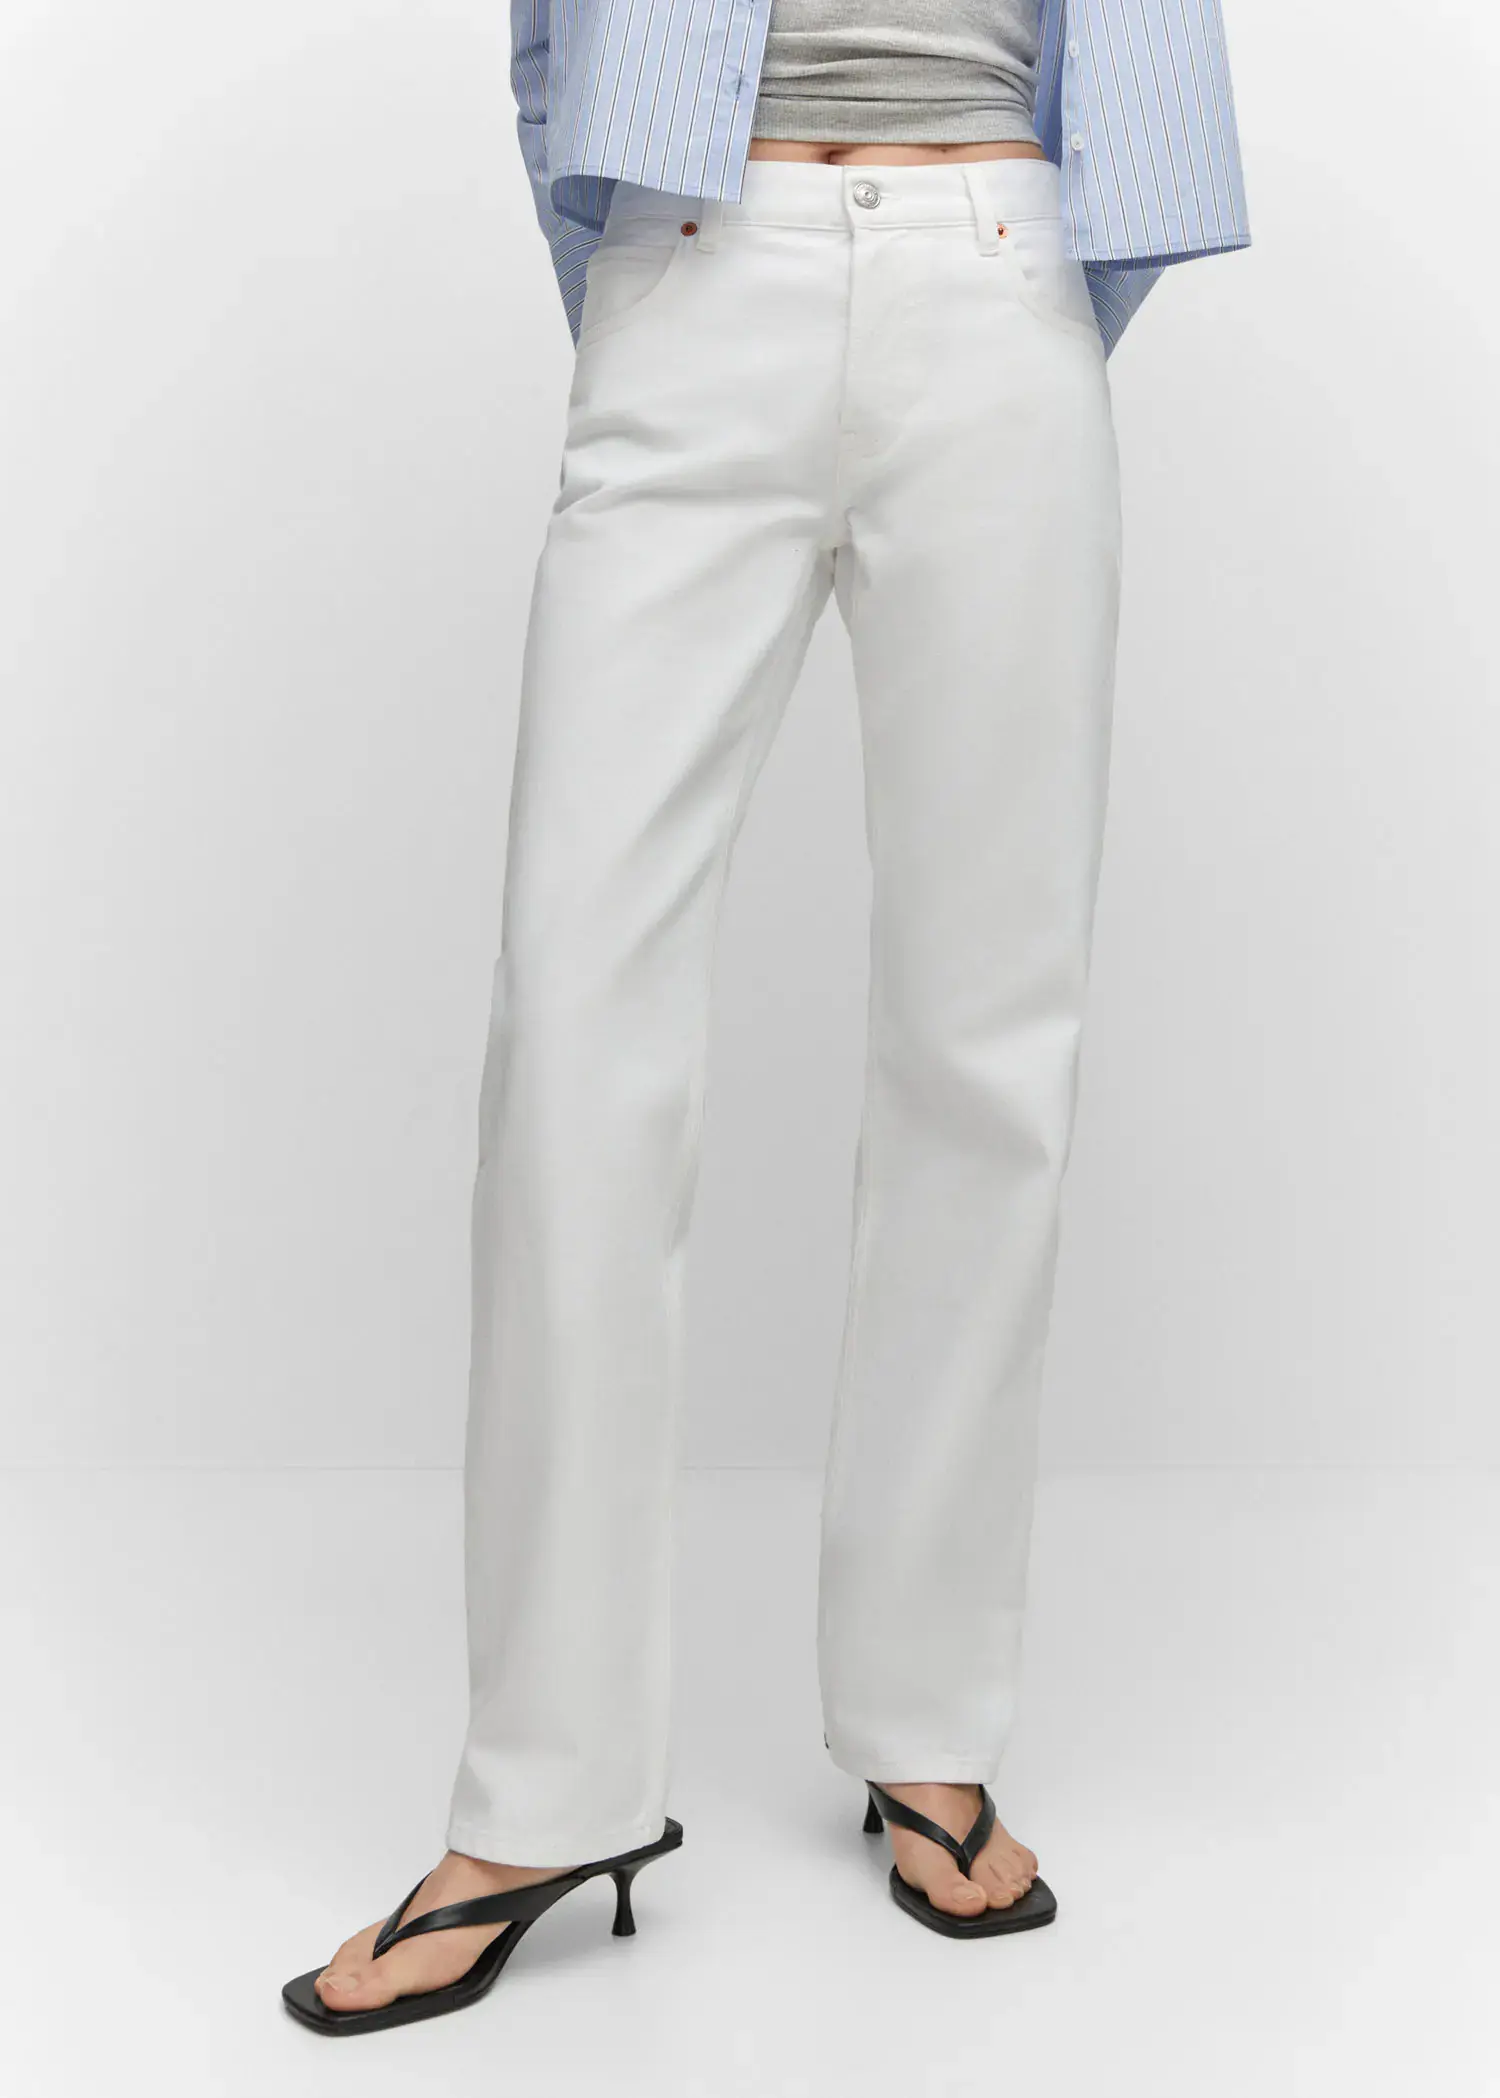 Mango Mid-rise straight jeans. a person wearing white pants and a white shirt. 